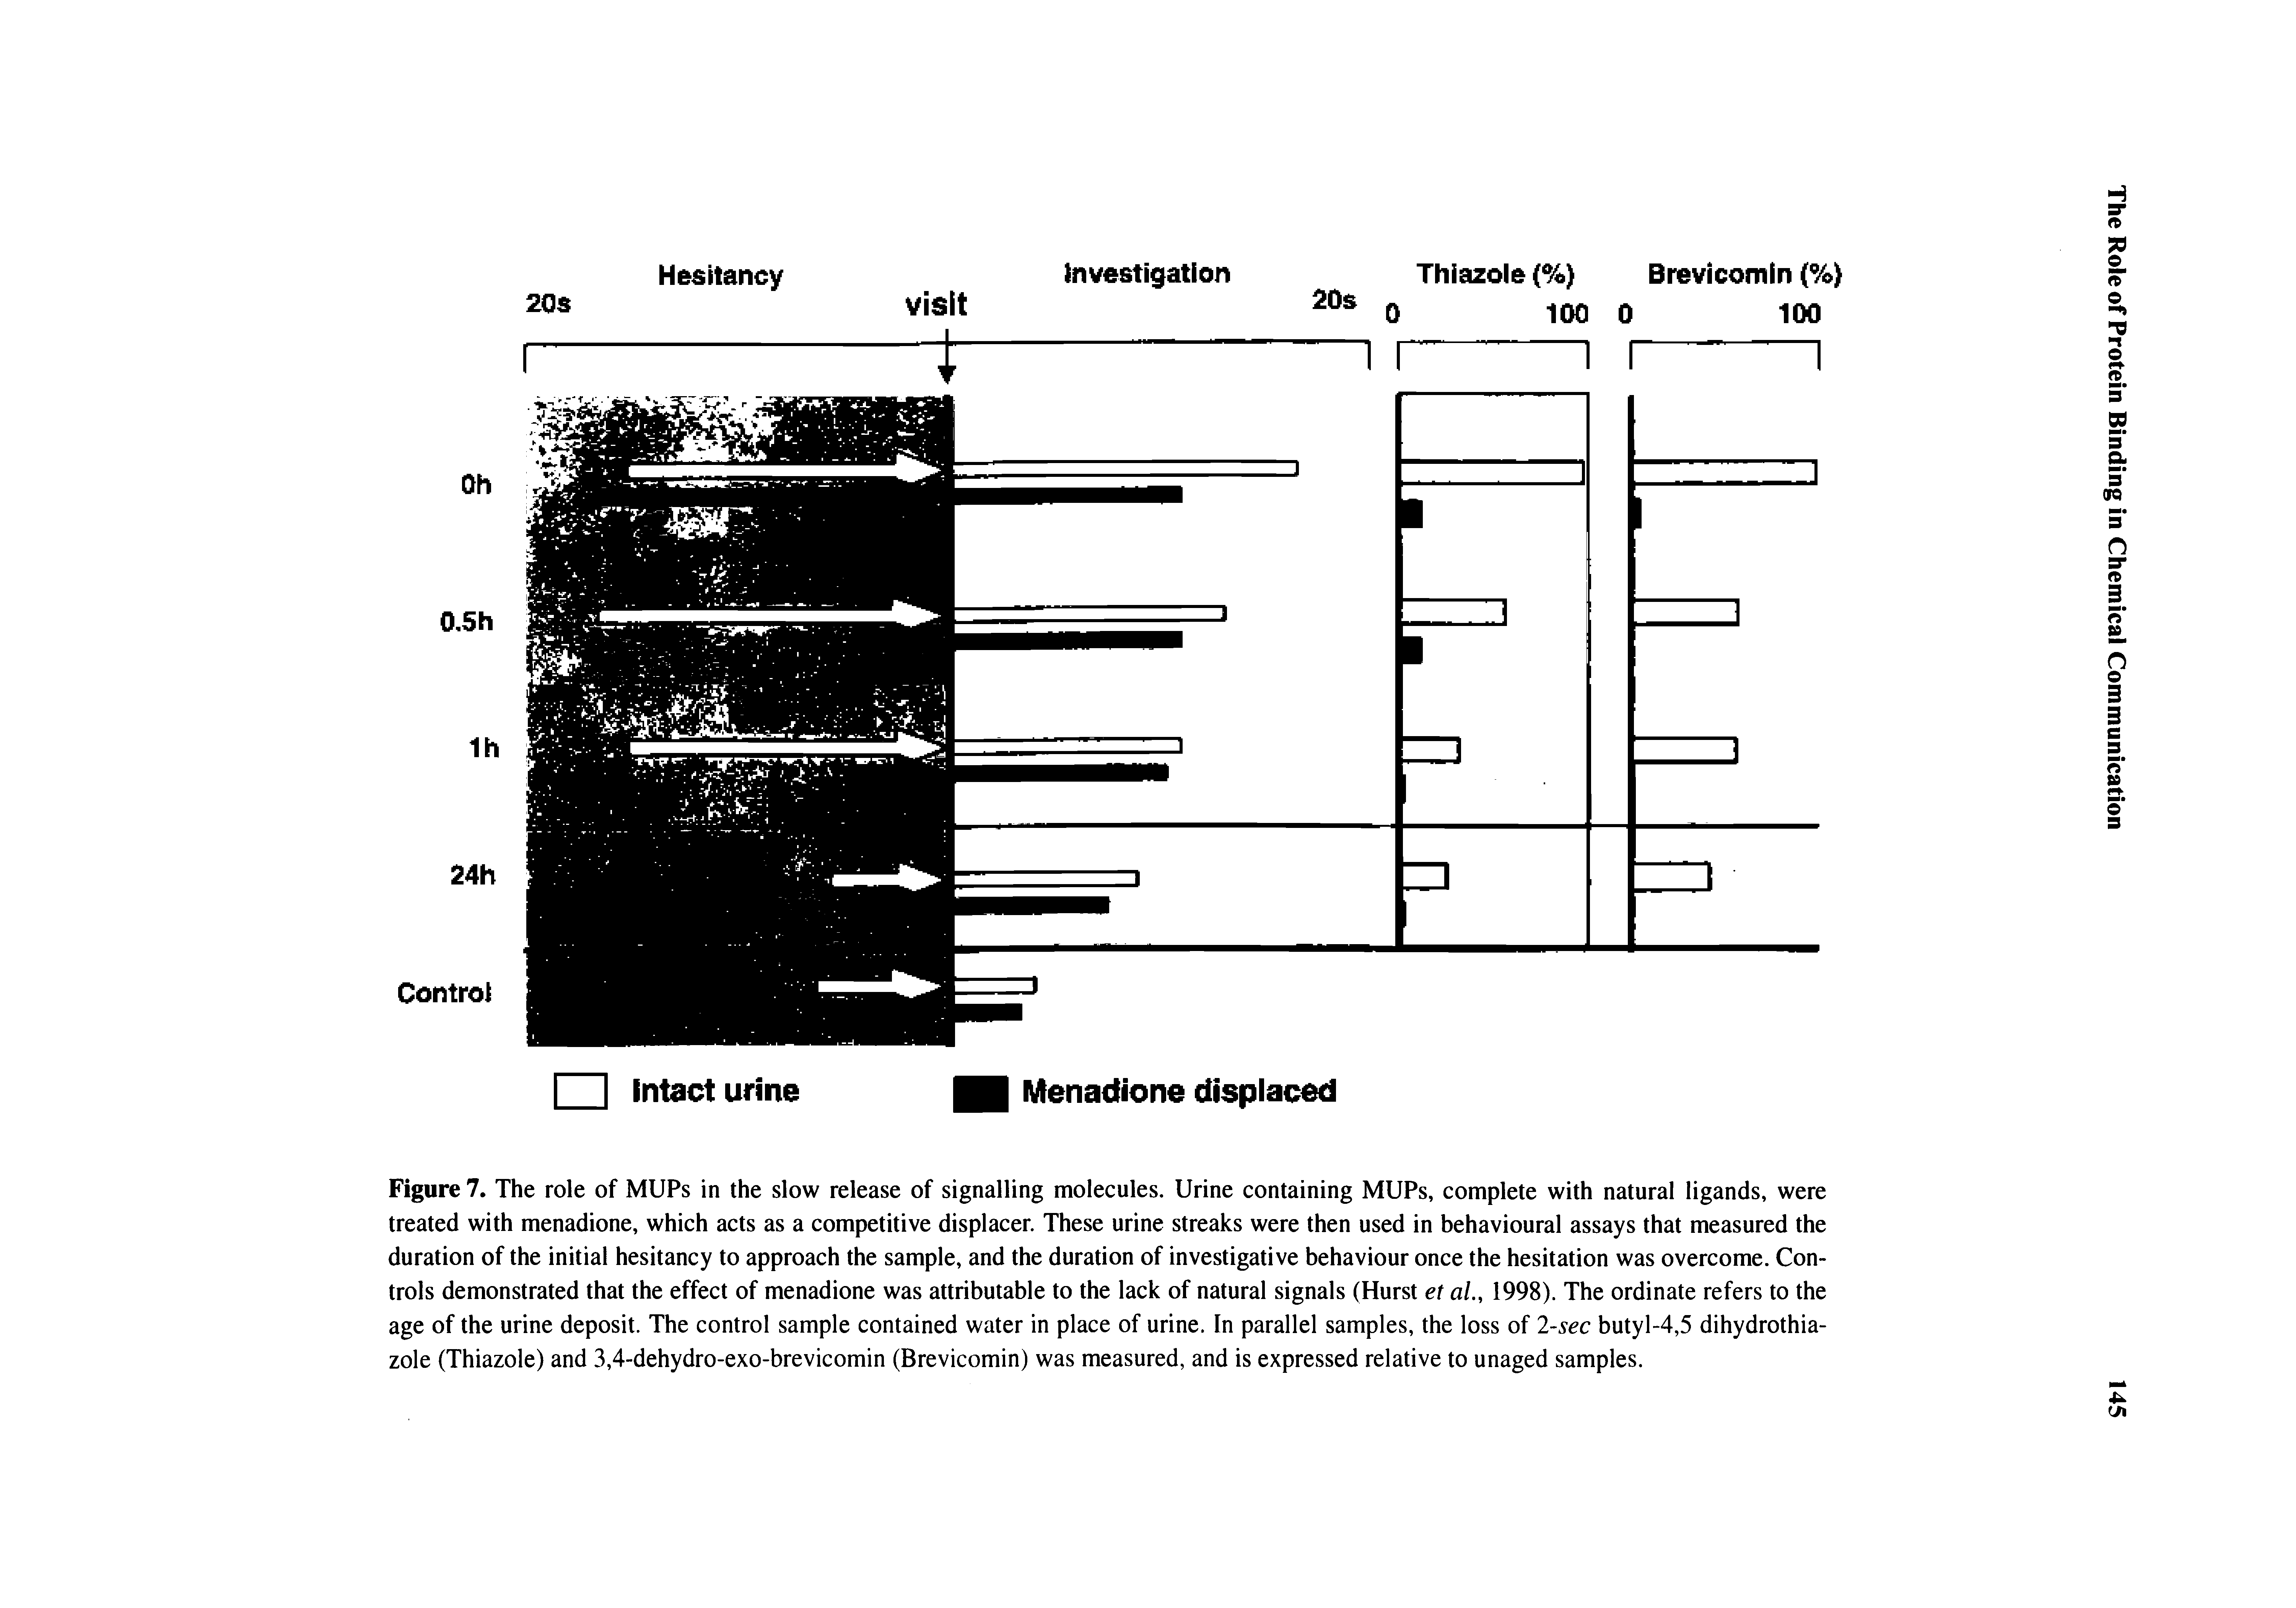 Figure 7. The role of MUPs in the slow release of signalling molecules. Urine containing MUPs, complete with natural ligands, were treated with menadione, which acts as a competitive displacer. These urine streaks were then used in behavioural assays that measured the duration of the initial hesitancy to approach the sample, and the duration of investigative behaviour once the hesitation was overcome. Controls demonstrated that the effect of menadione was attributable to the lack of natural signals (Hurst et al., 1998). The ordinate refers to the age of the urine deposit. The control sample contained water in place of urine. In parallel samples, the loss of 2-sec butyl-4,5 dihydrothia-zole (Thiazole) and 3,4-dehydro-exo-brevicomin (Brevicomin) was measured, and is expressed relative to unaged samples.